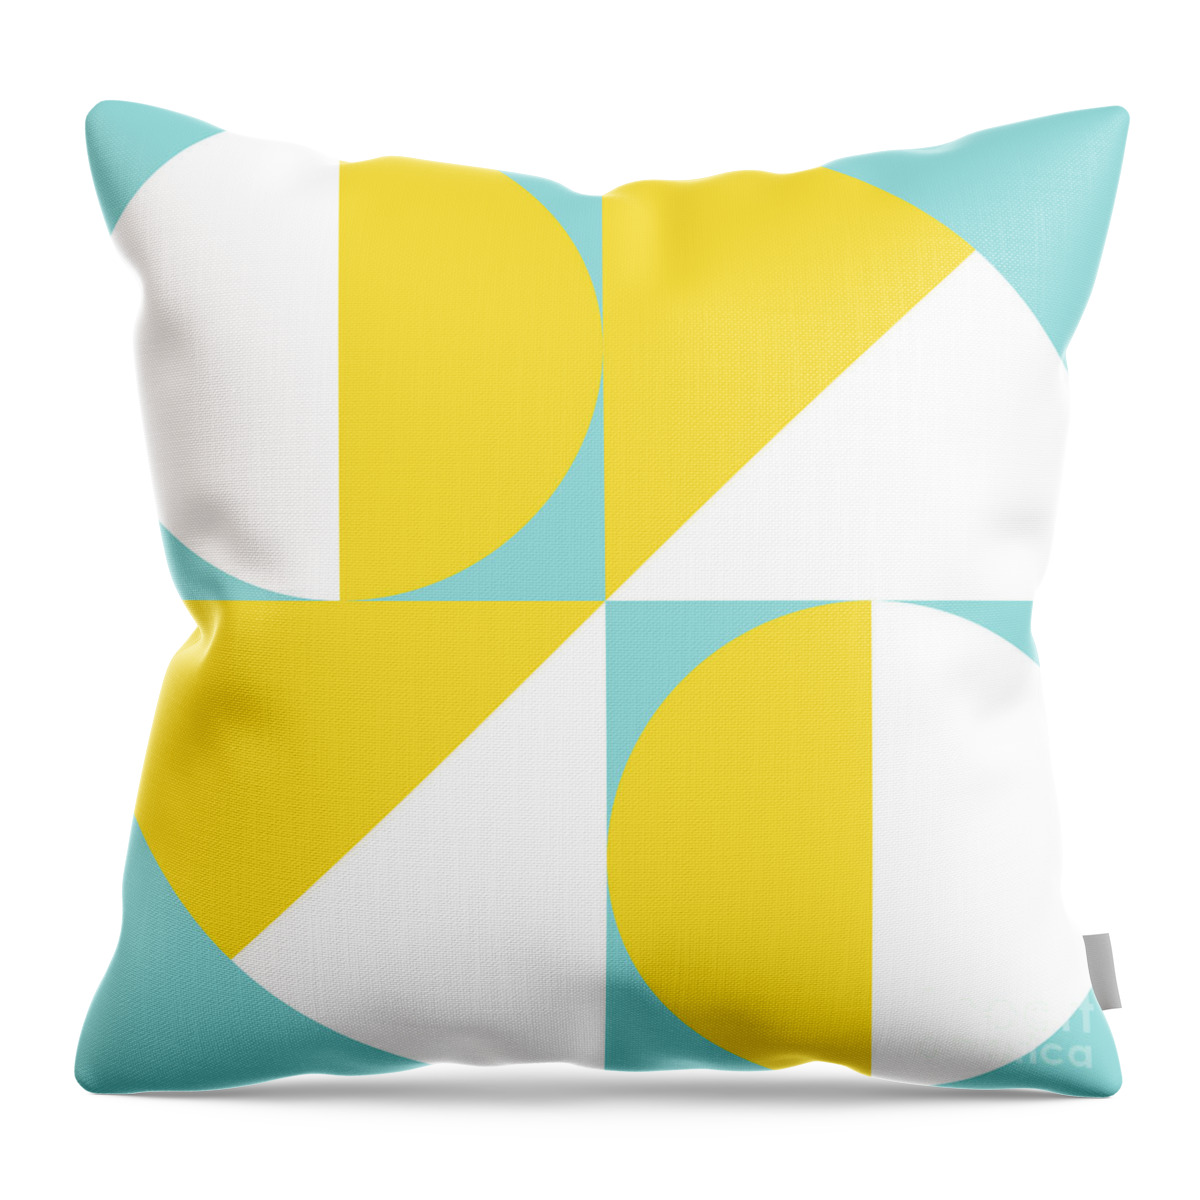 Minimalist Throw Pillow featuring the digital art Squared Circle Quadrants - Buttercup - Limpet Shell - White by Jason Freedman